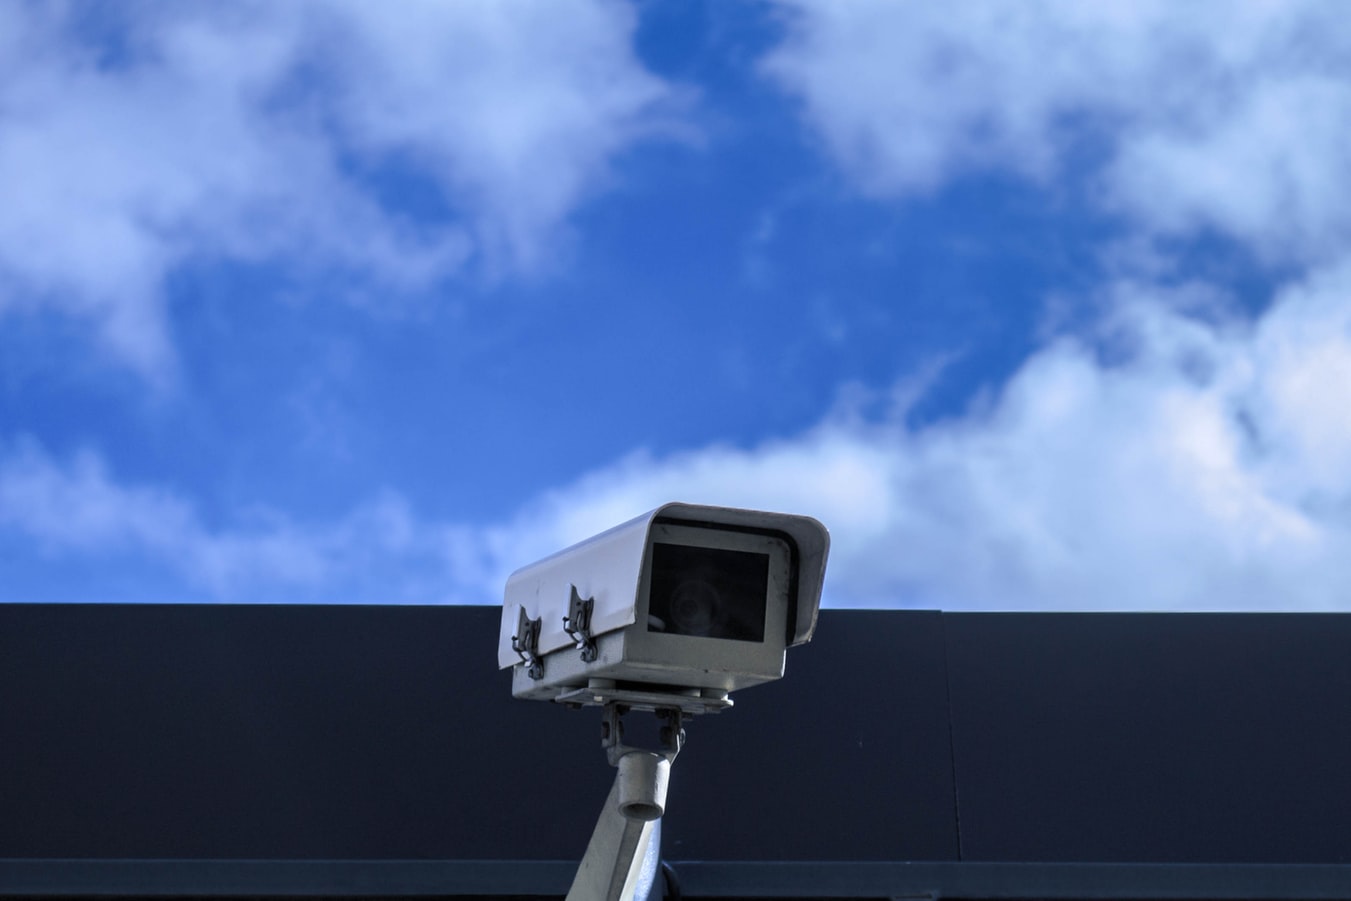 A security camera posted on the top of a building